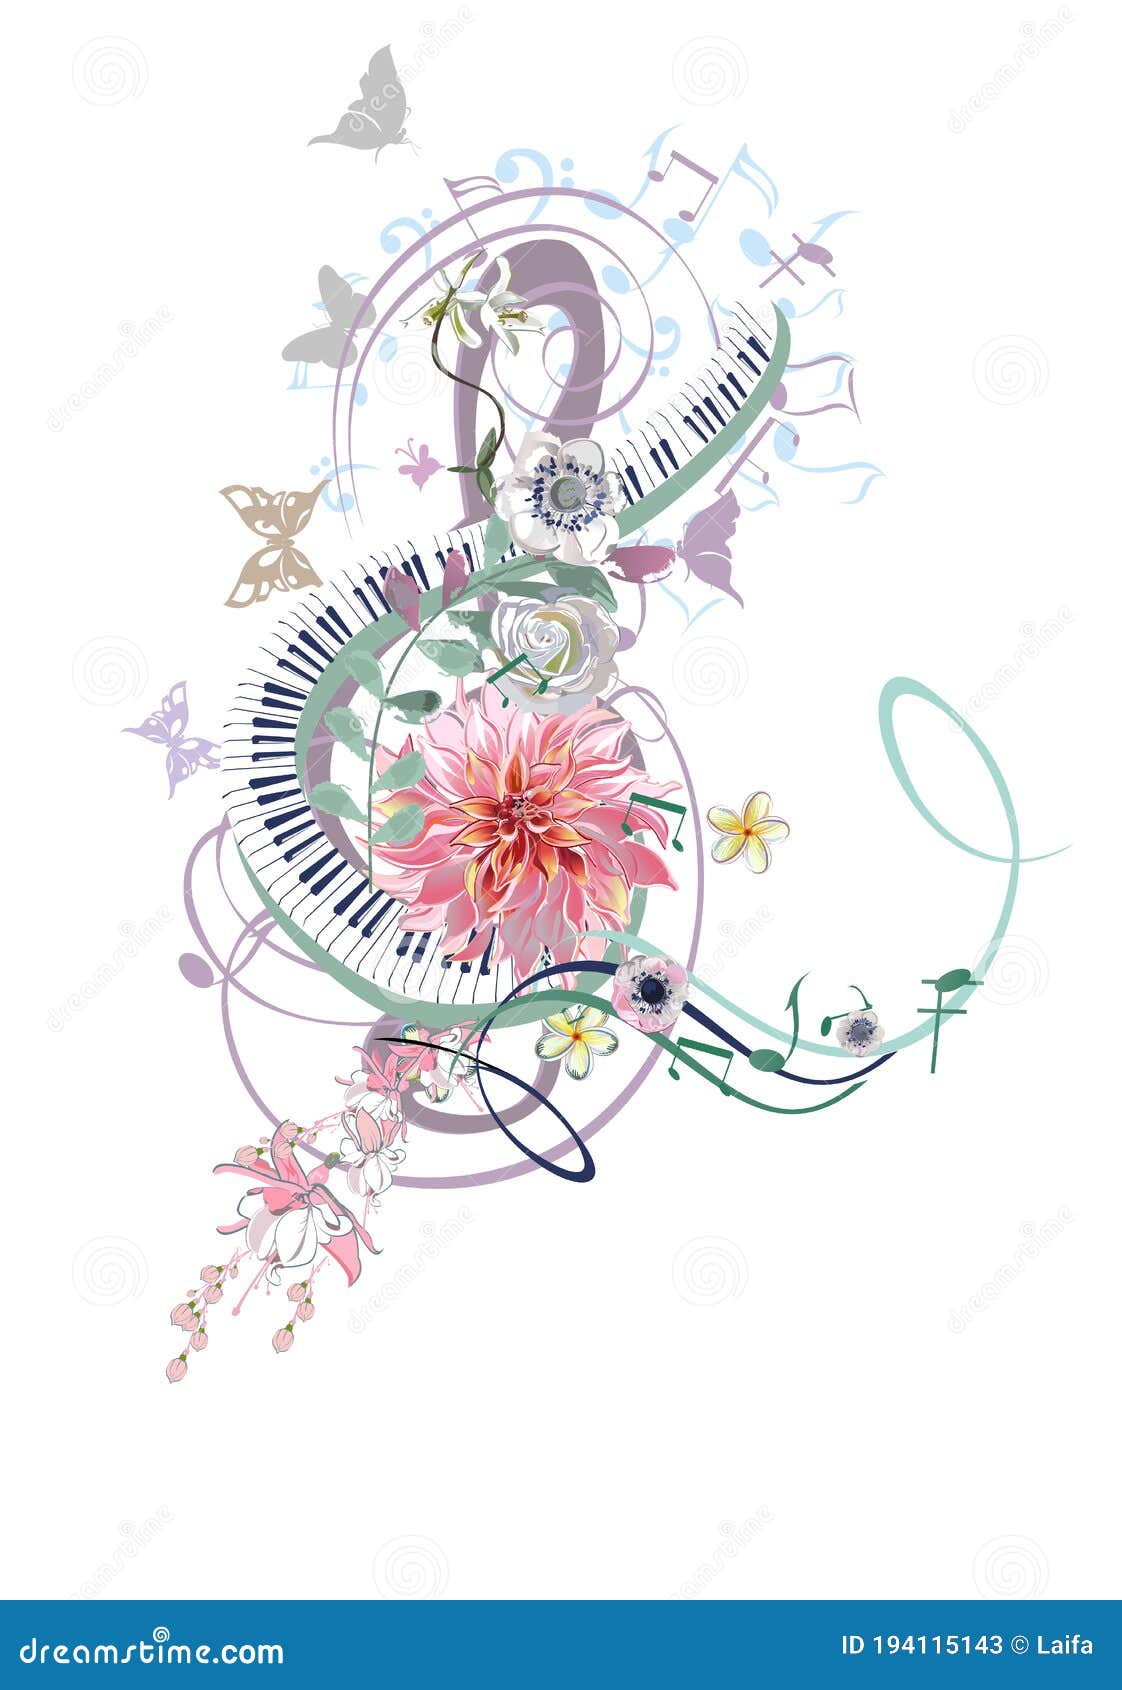 abstract treble clef decorated with summer and spring flowers, palm leaves, notes, birds.